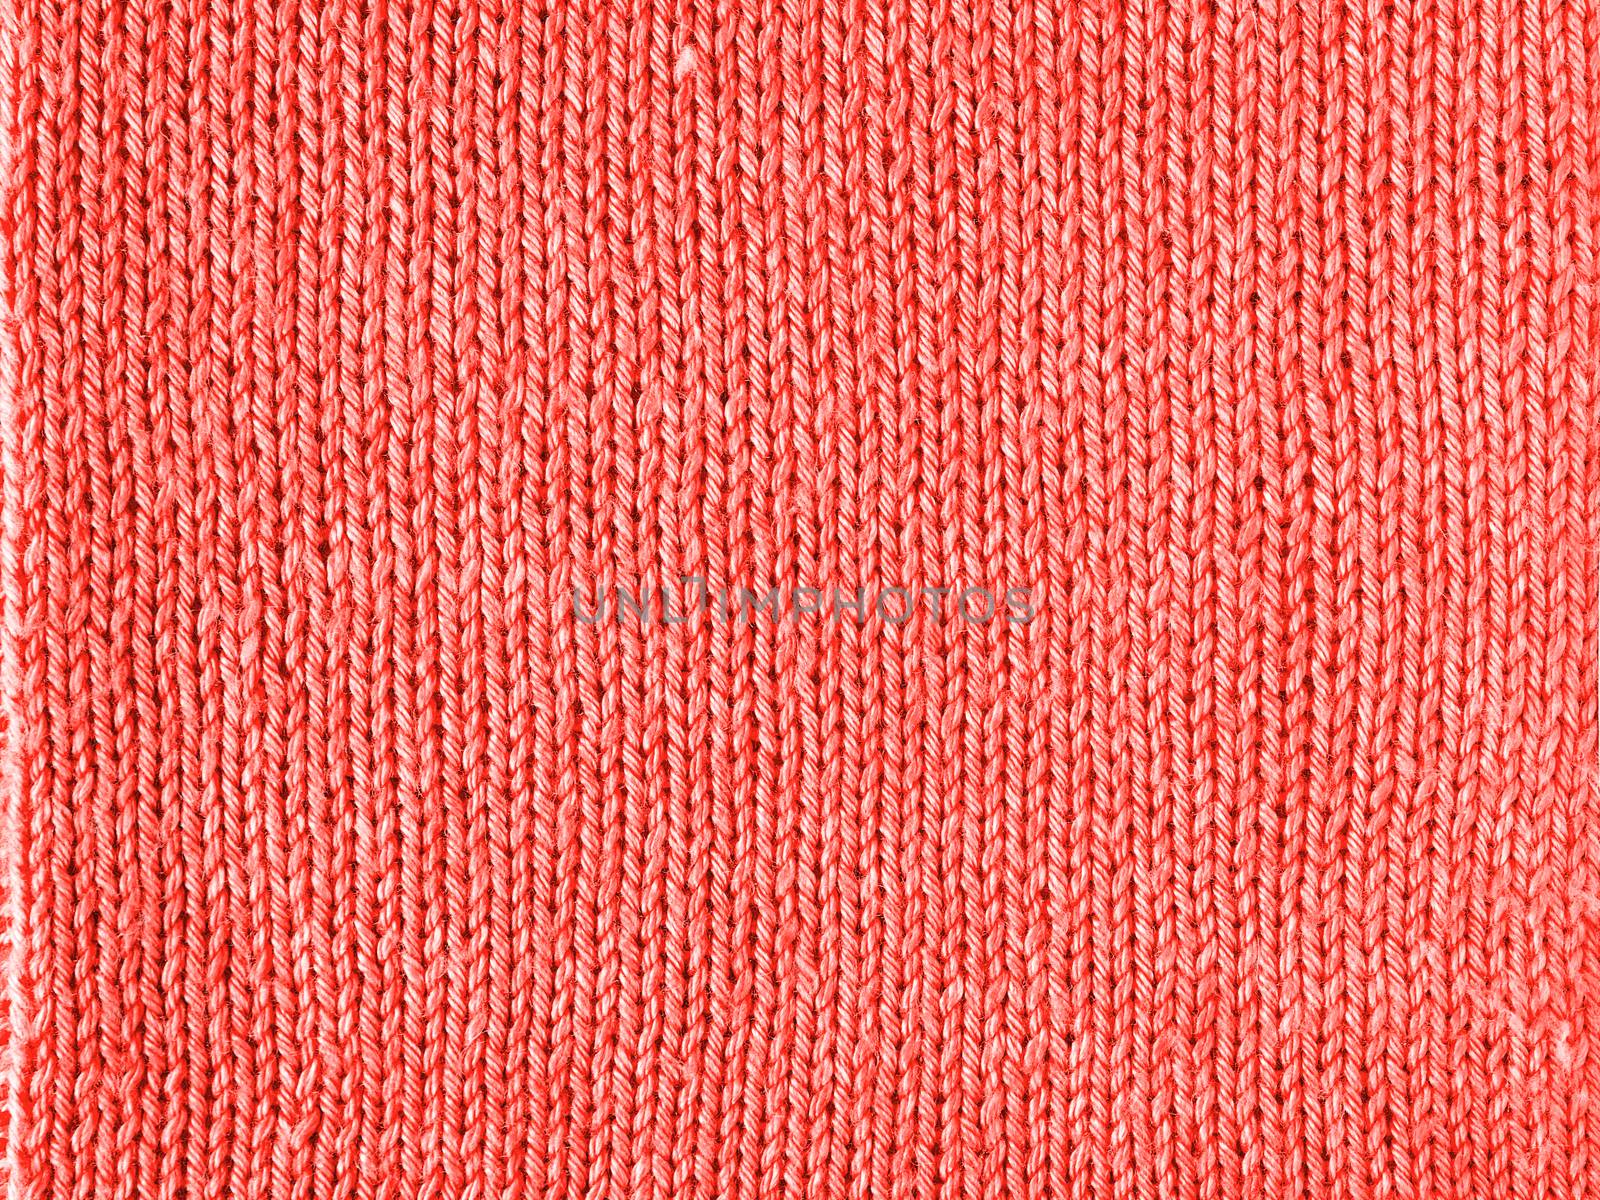 Knitted Living Coral texture jersey as background by fascinadora